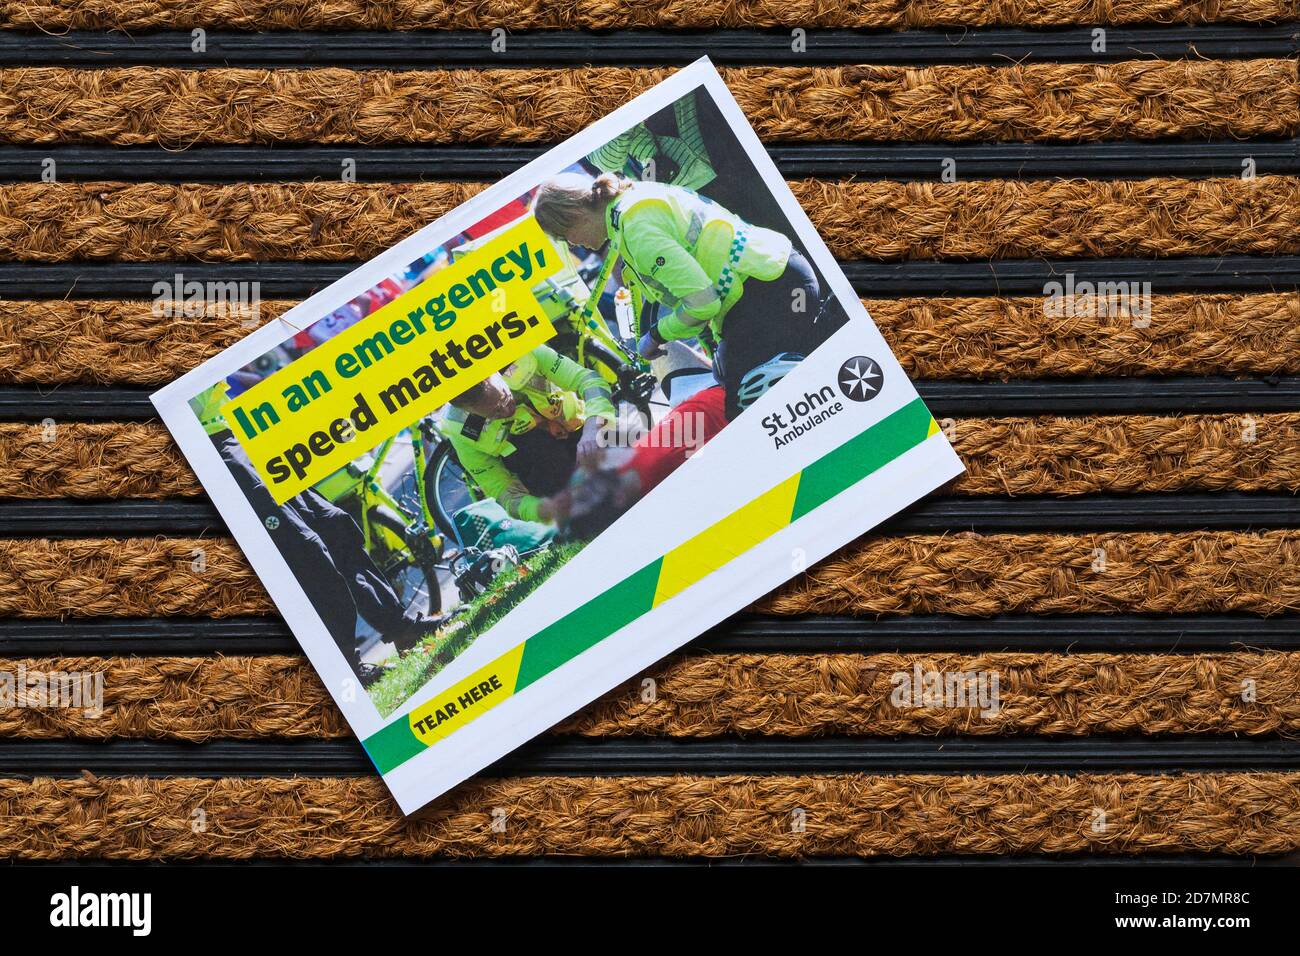 Post mail on doormat - appeal from St John Ambulance, in an emergency speed matters Stock Photo